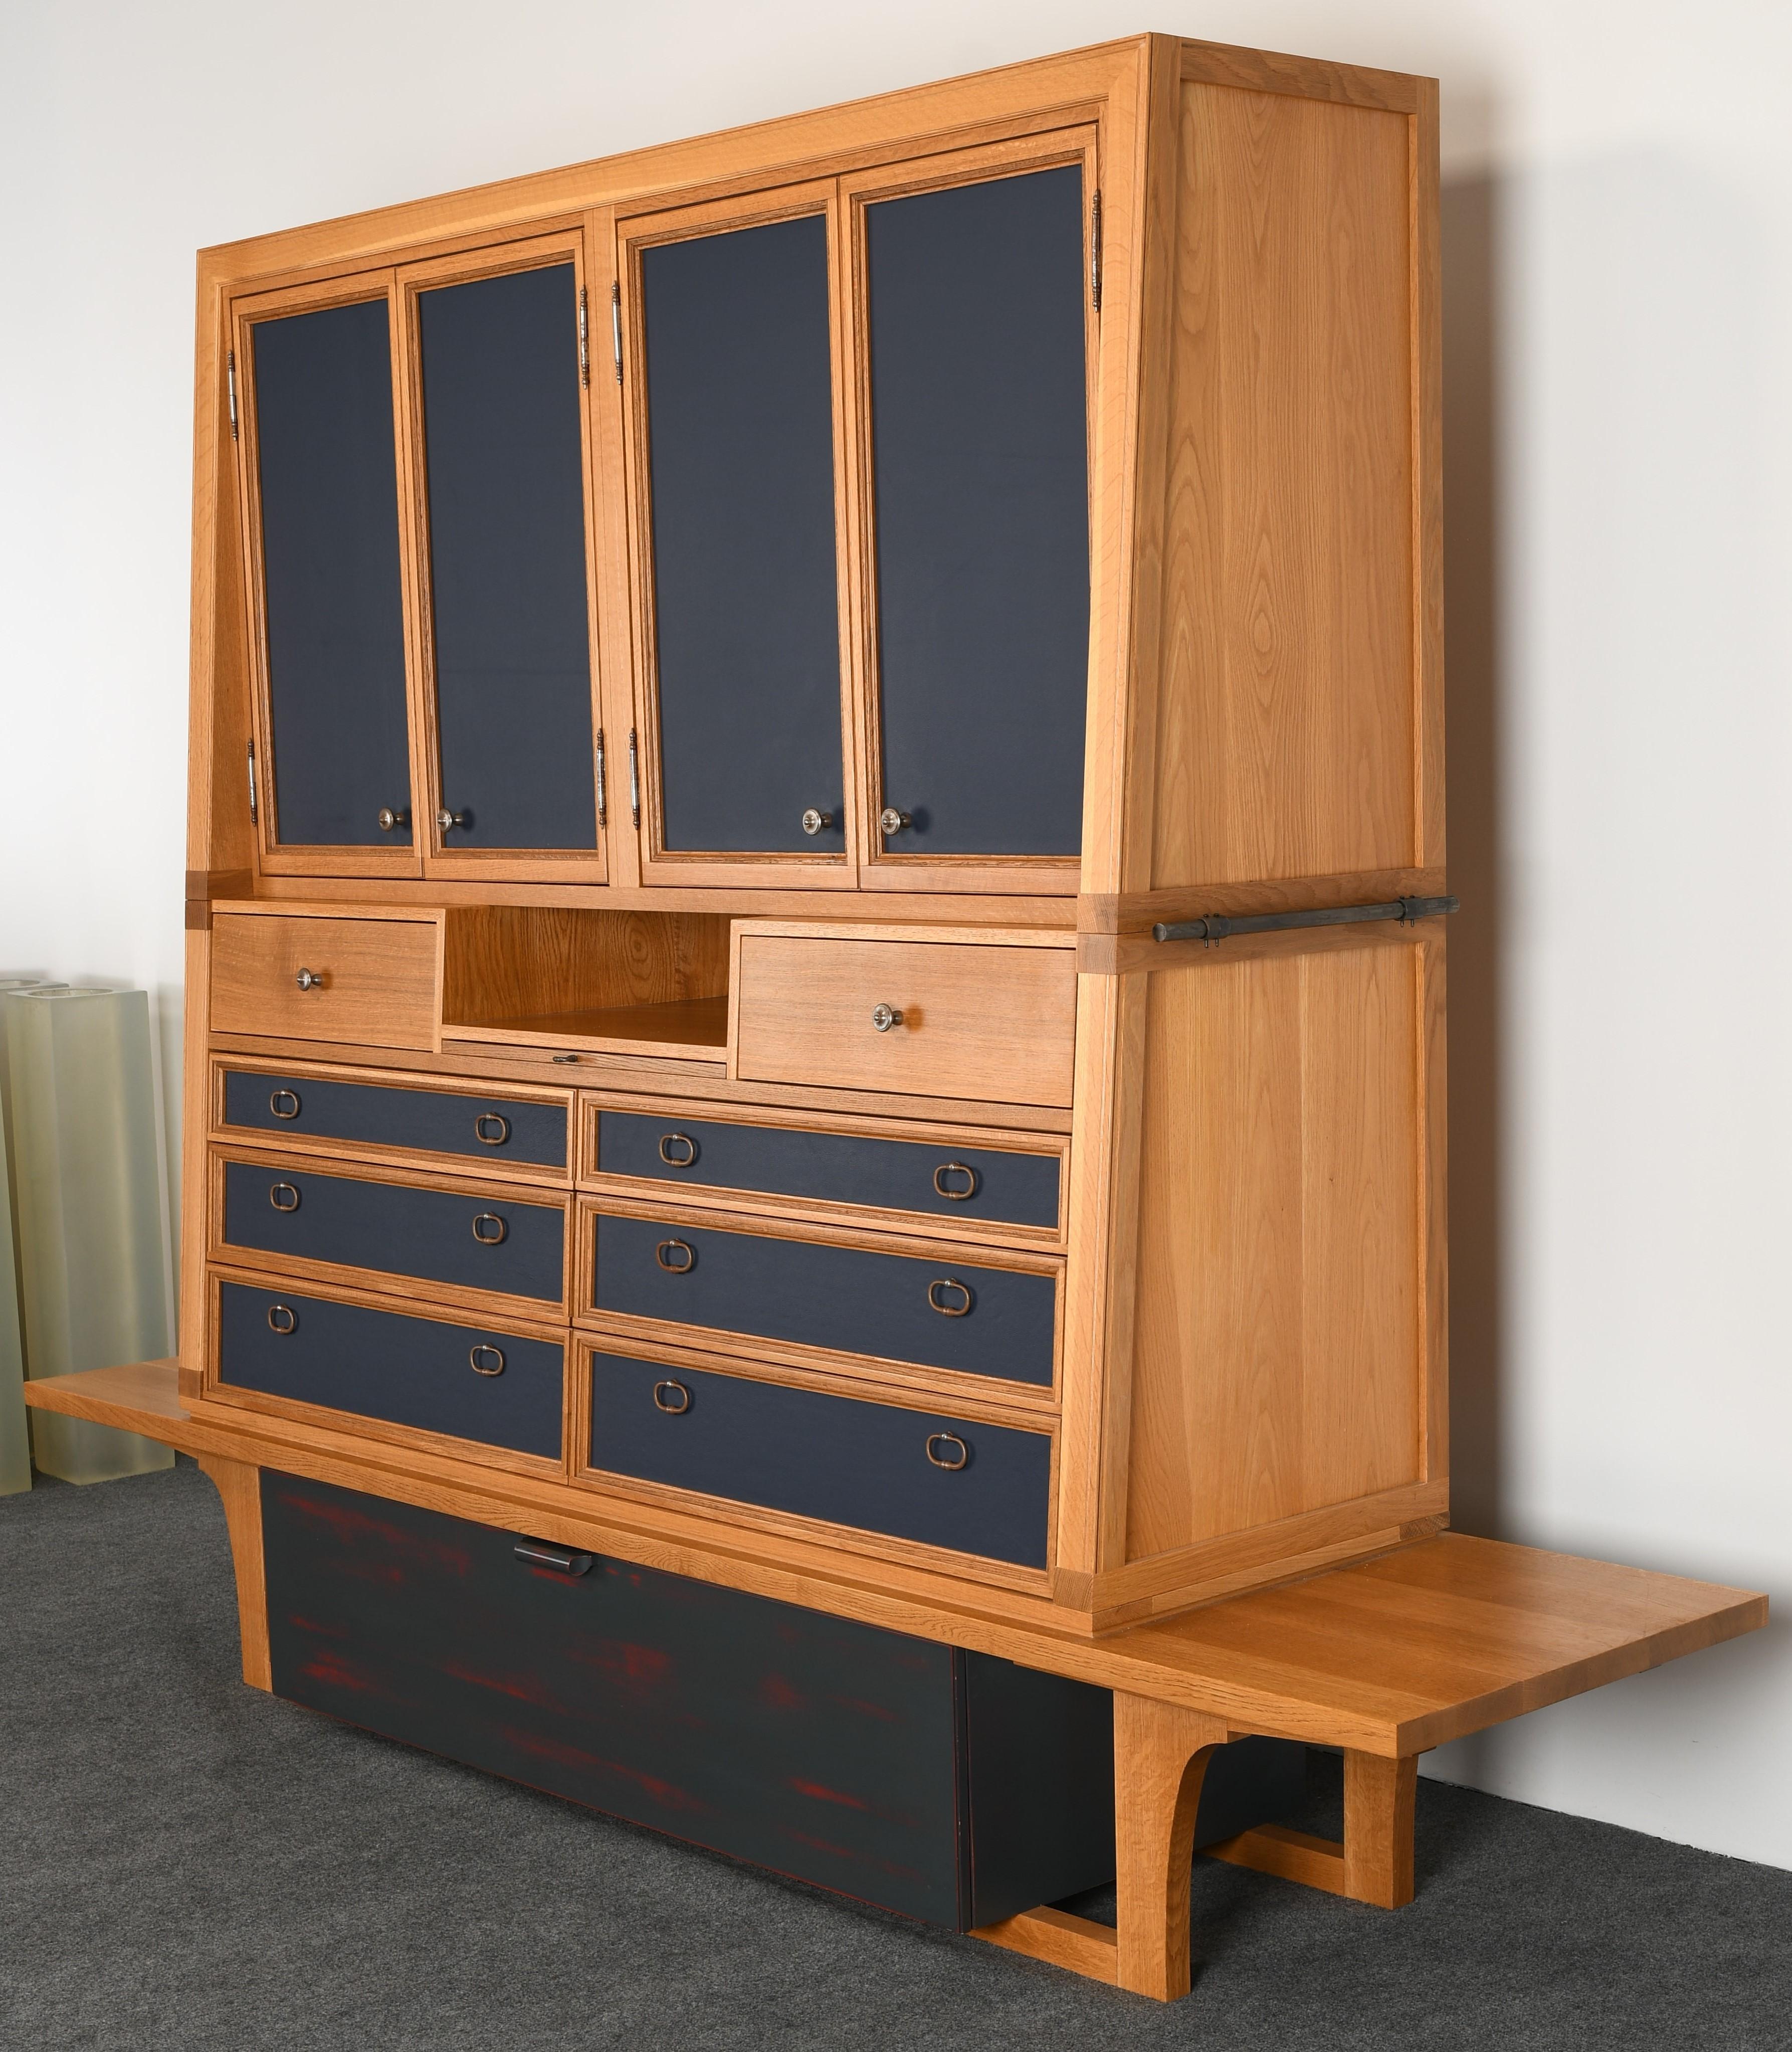 An exceptionally crafted custom made oak storage cabinets. Fitted with drawers and cupboard doors featuring blue leather fronts, bottom drawer has a decorative paint finish, each cabinet sold individually. These chest of drawers or wardrobes are